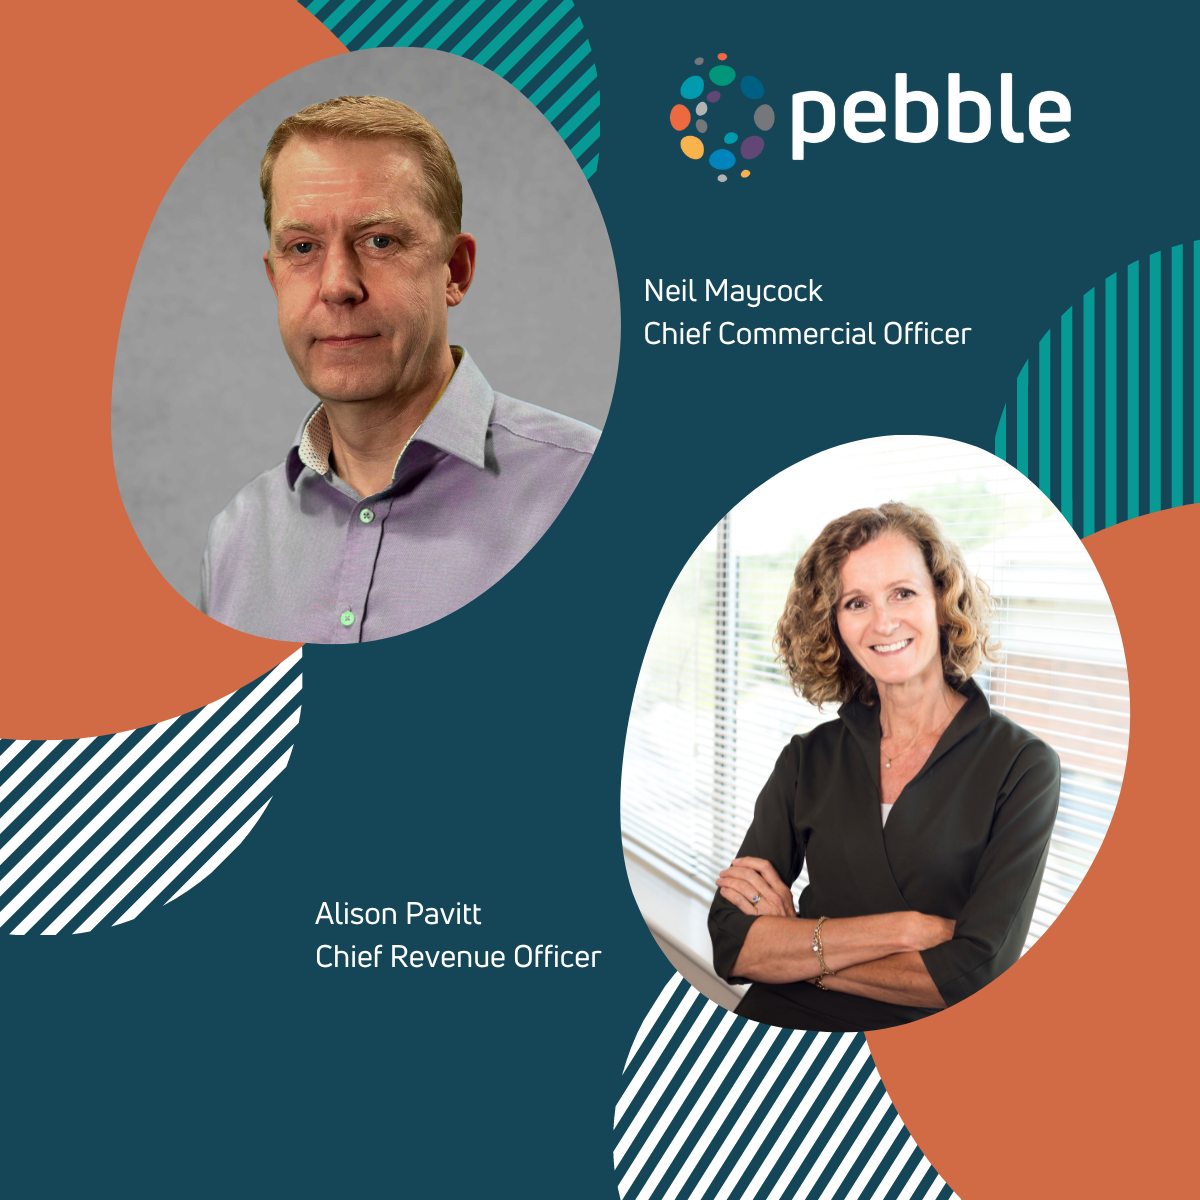 Neil Maycock joins Pebble as Chief Commercial Officer and Alison Pavitt has been promoted to Chief Revenue Officer following a successful two years as Director of Sales and Marketing at the company tkt1957.com